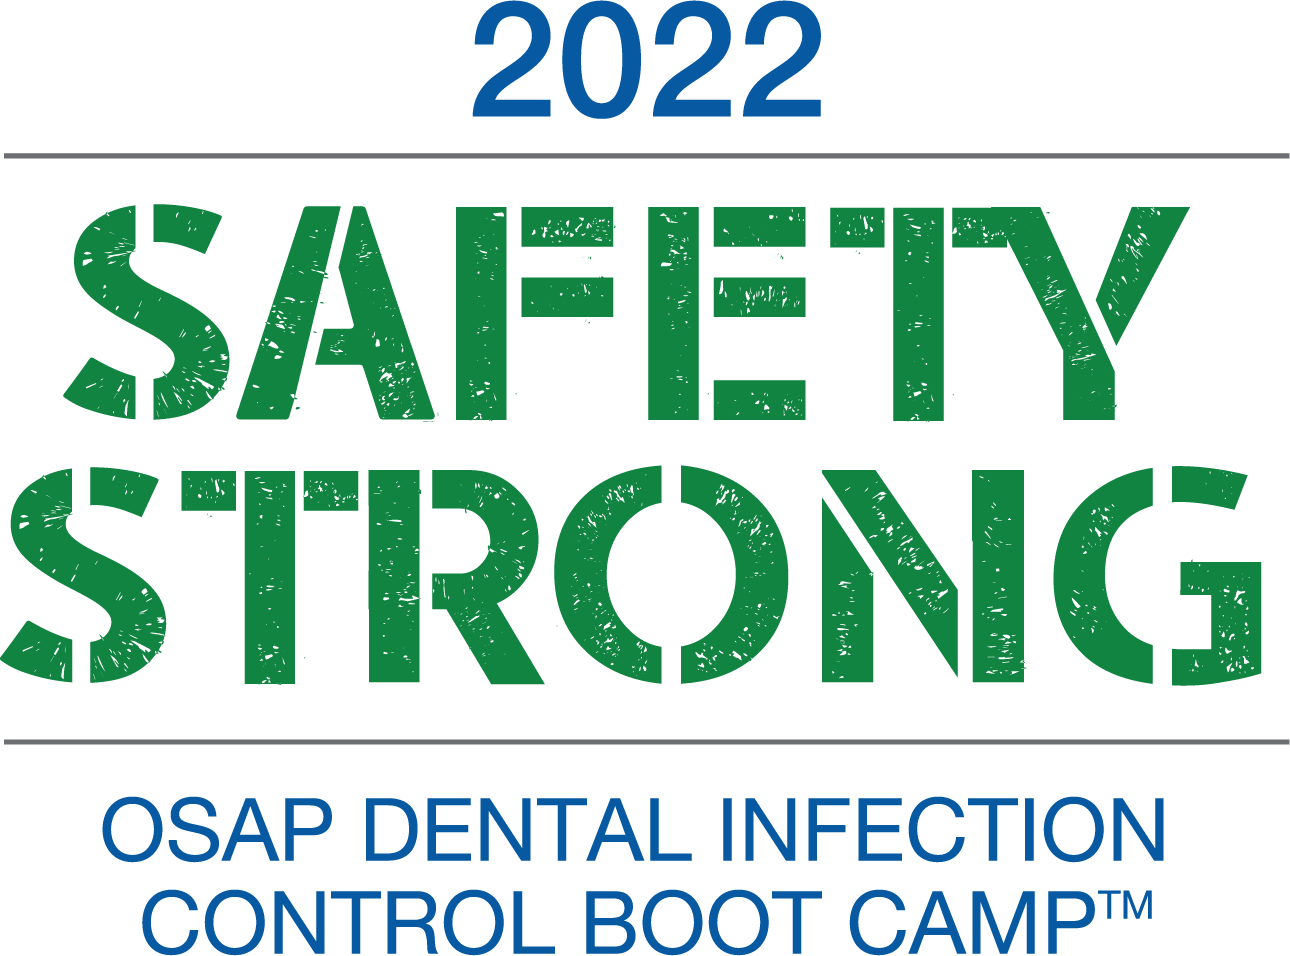 2022 OSAP Dental Infection Control Boot Camp